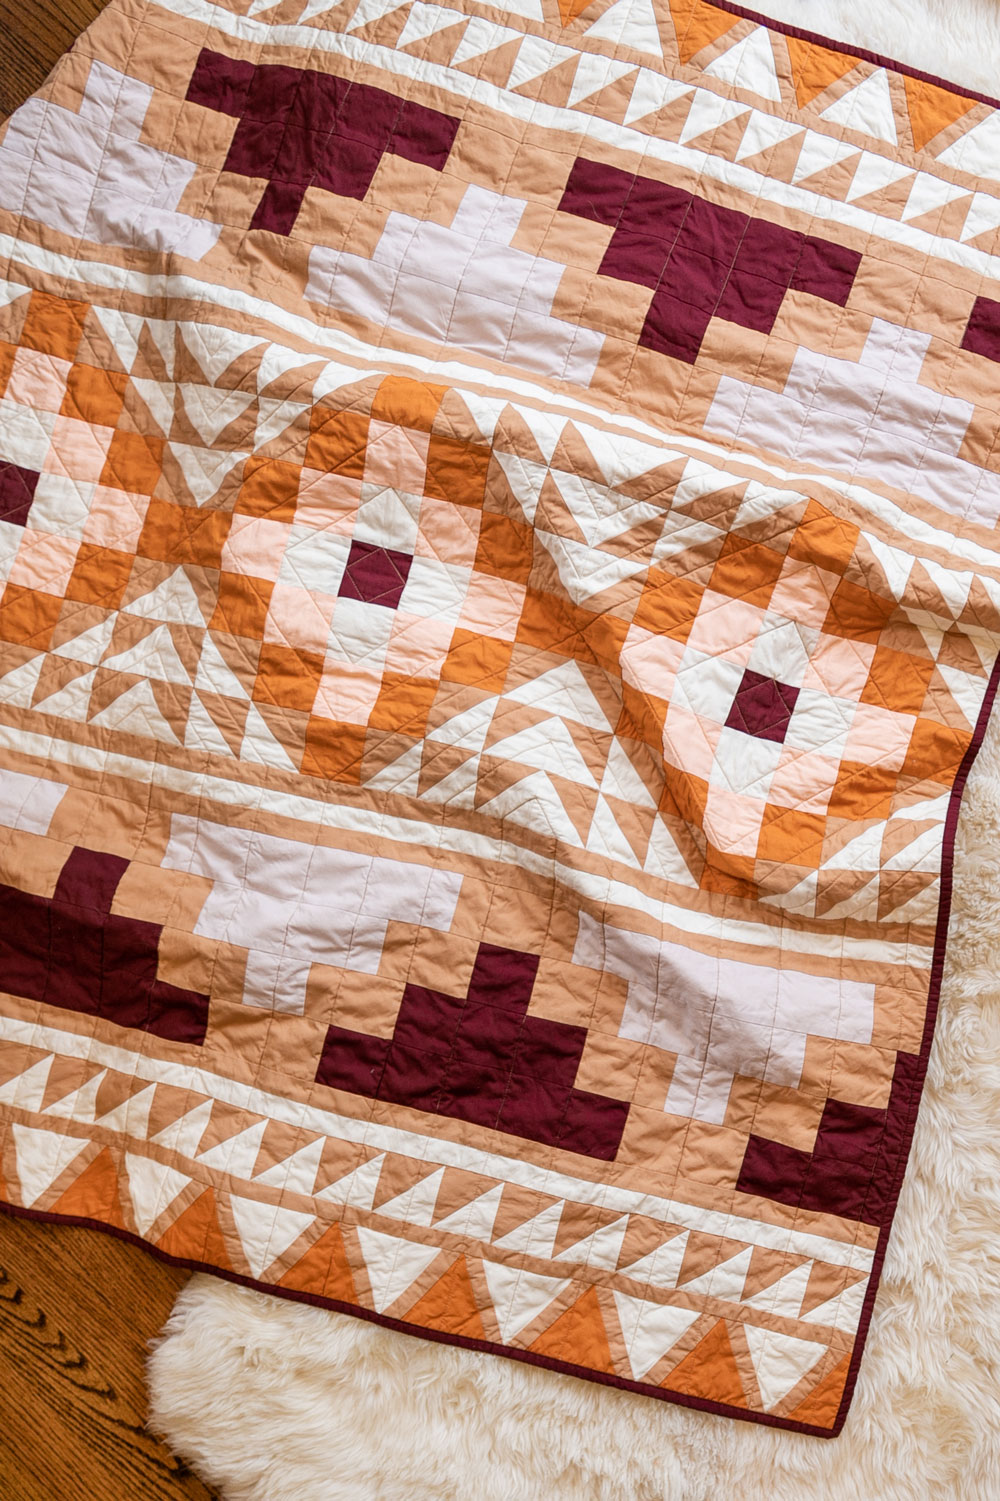 Easy Half Square Triangles Tutorial: A Mosaic quilt in sandy desert-inspired colors. suzyquilts.com #quilting #sewingdiy